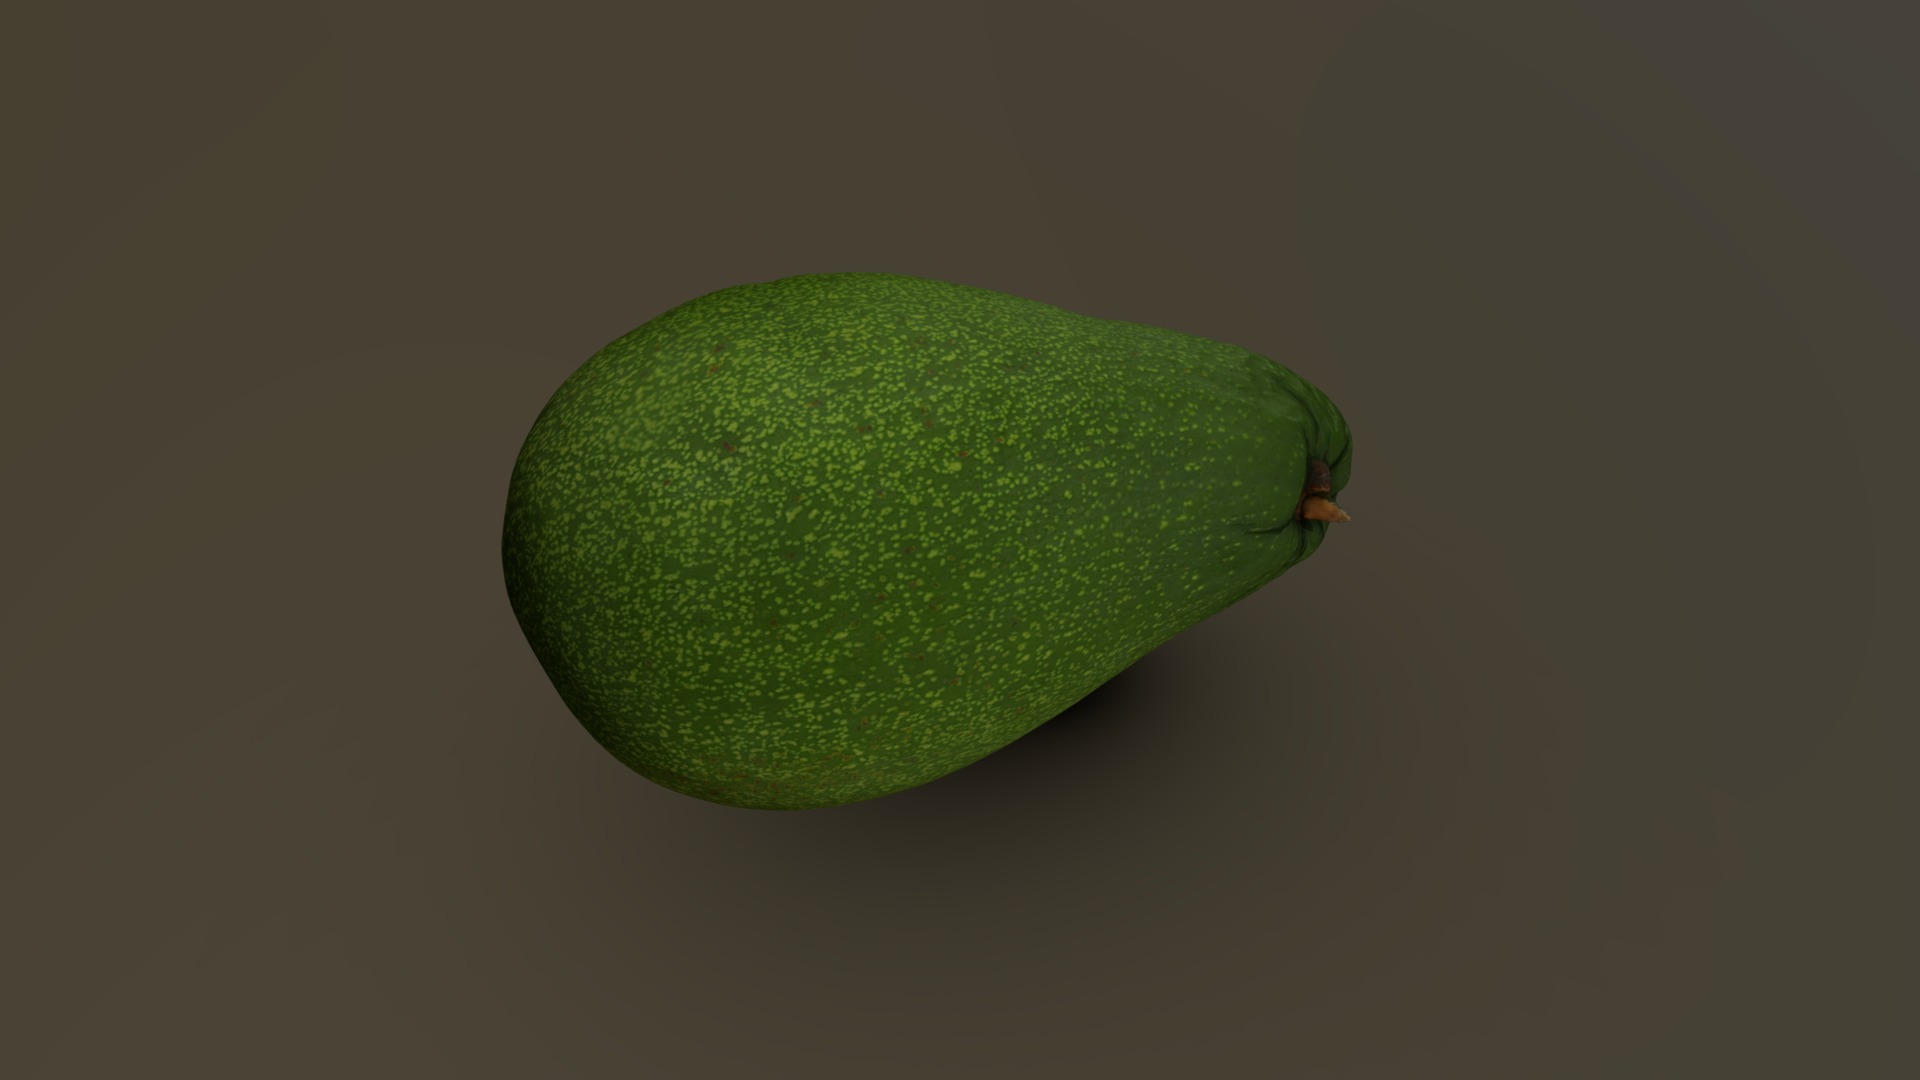 3D model Green Avocado 03 - This is a 3D model of the Green Avocado 03. The 3D model is about a green fruit on a black background.